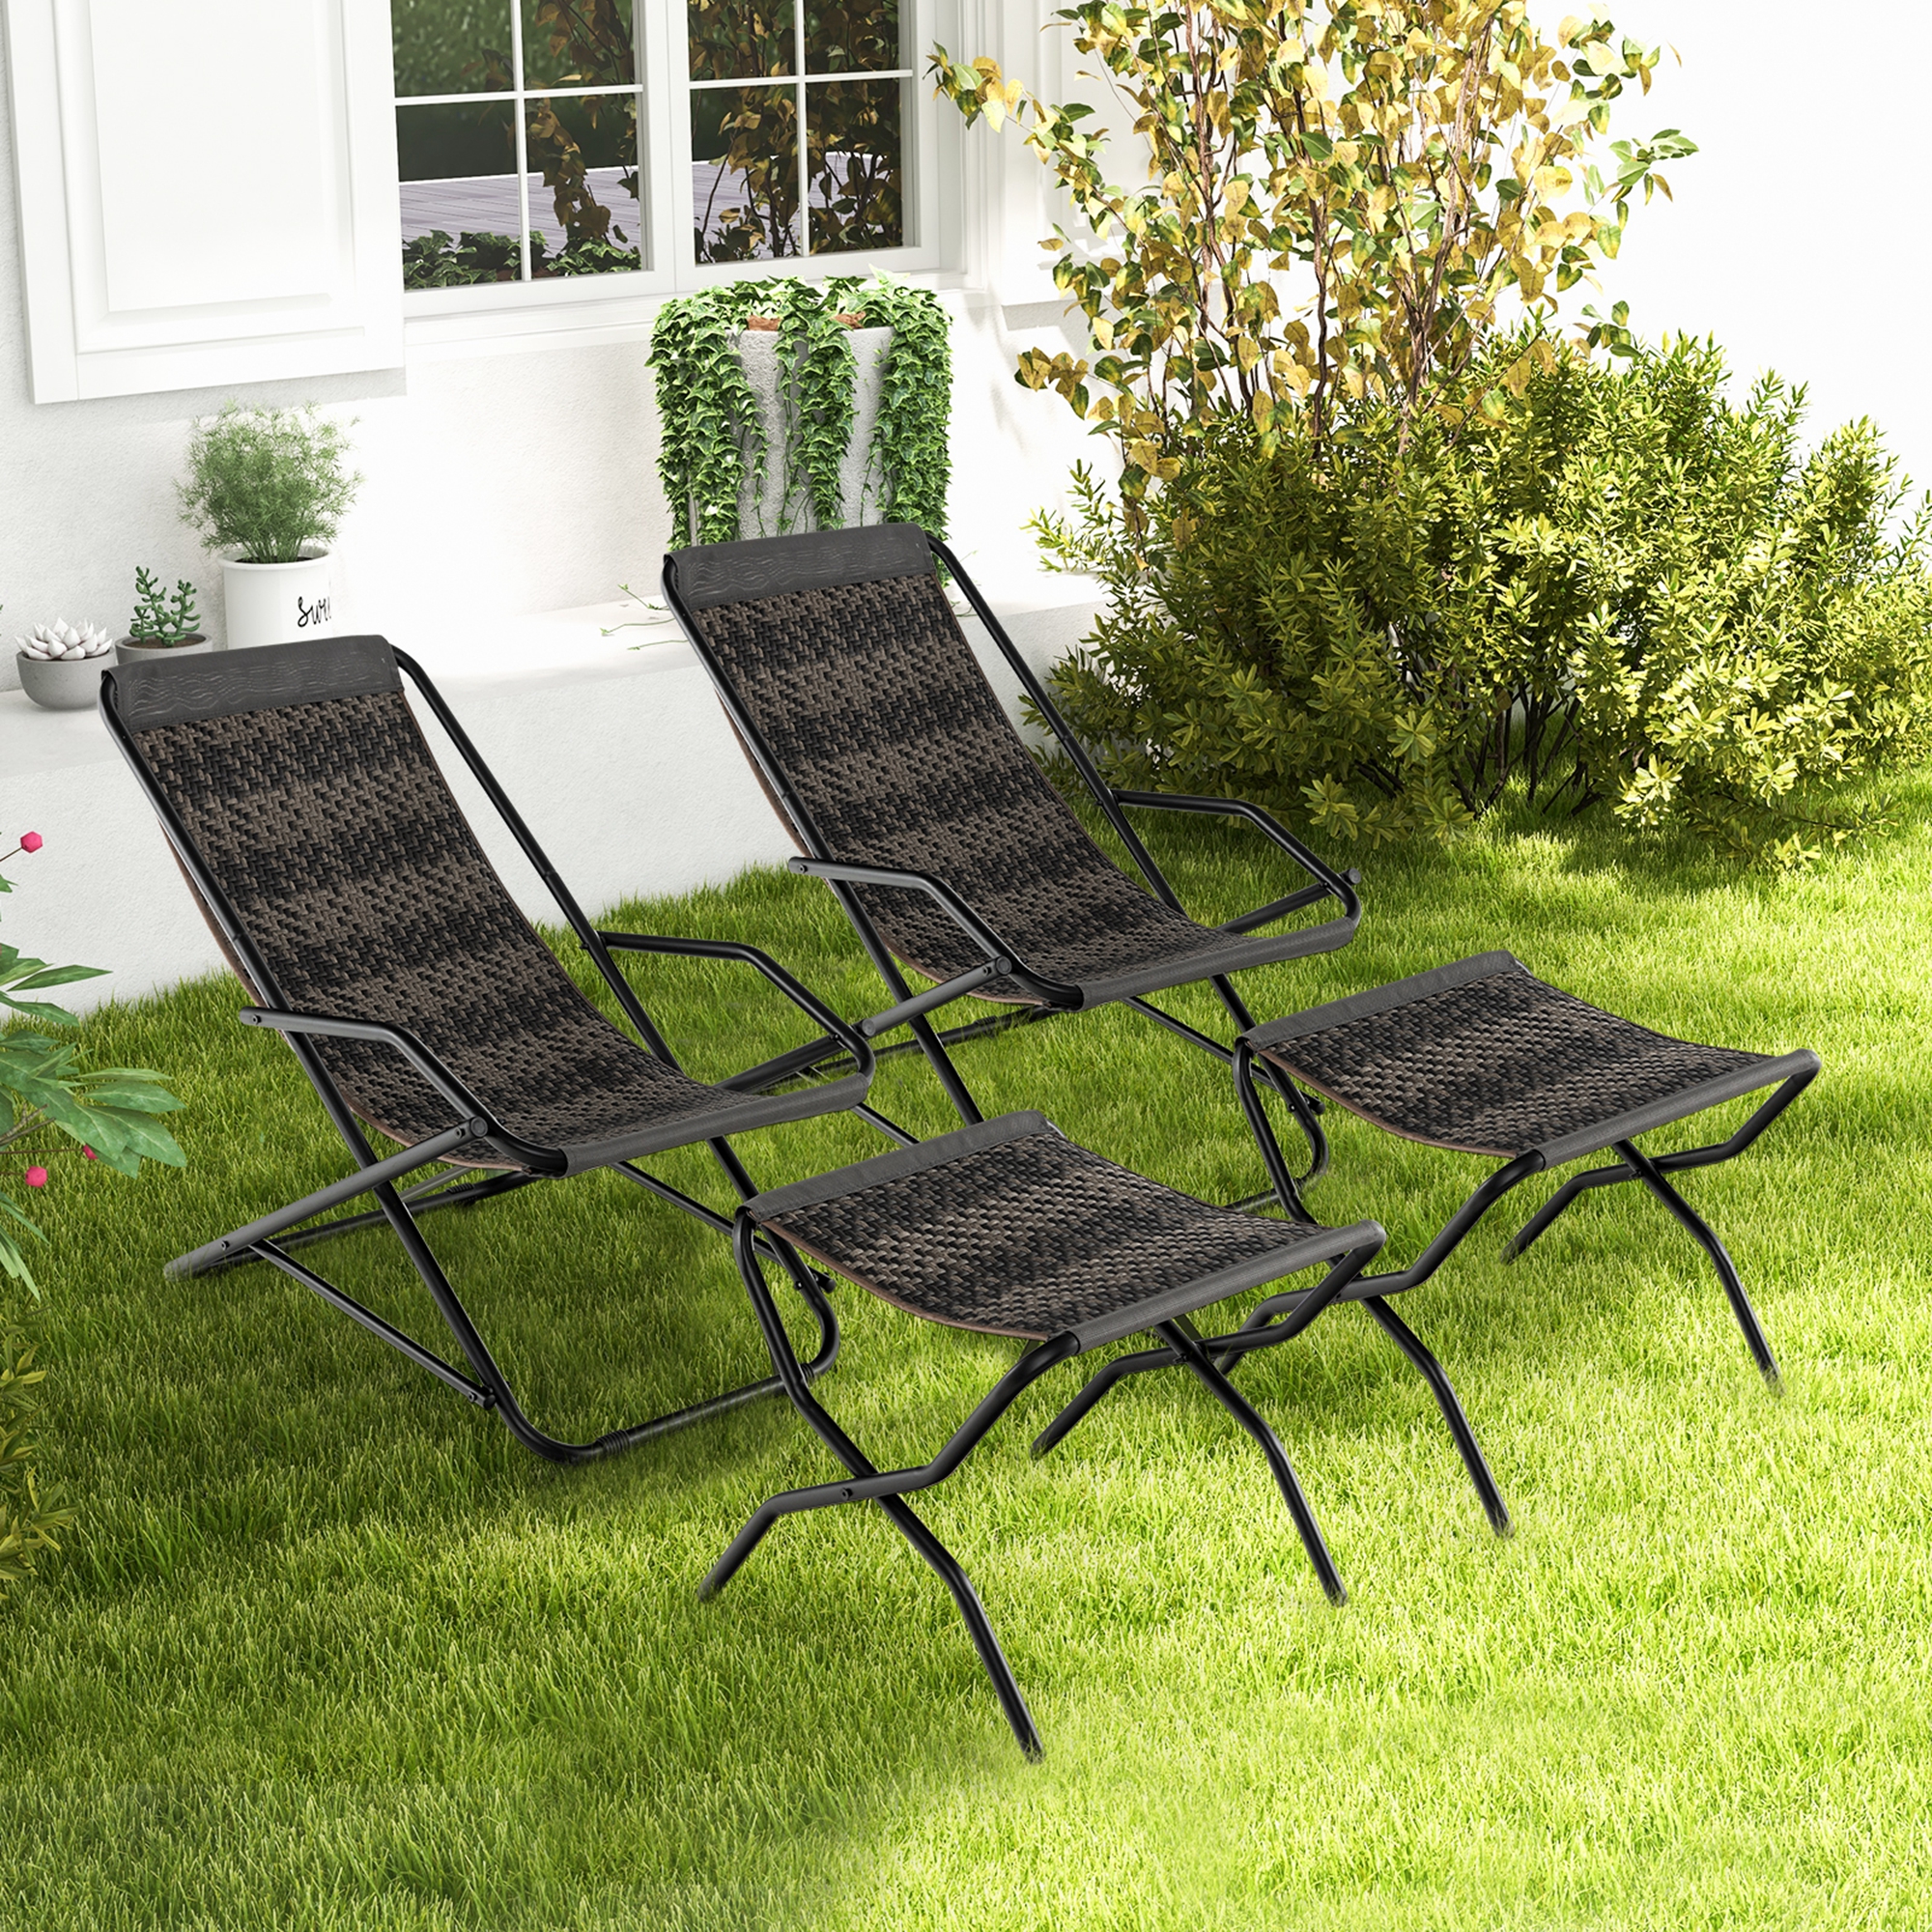 Costway 1 PC Patio Folding Rattan Sling Chair Rocking Lounge Chaise Armrest Garden Portable - image 5 of 8